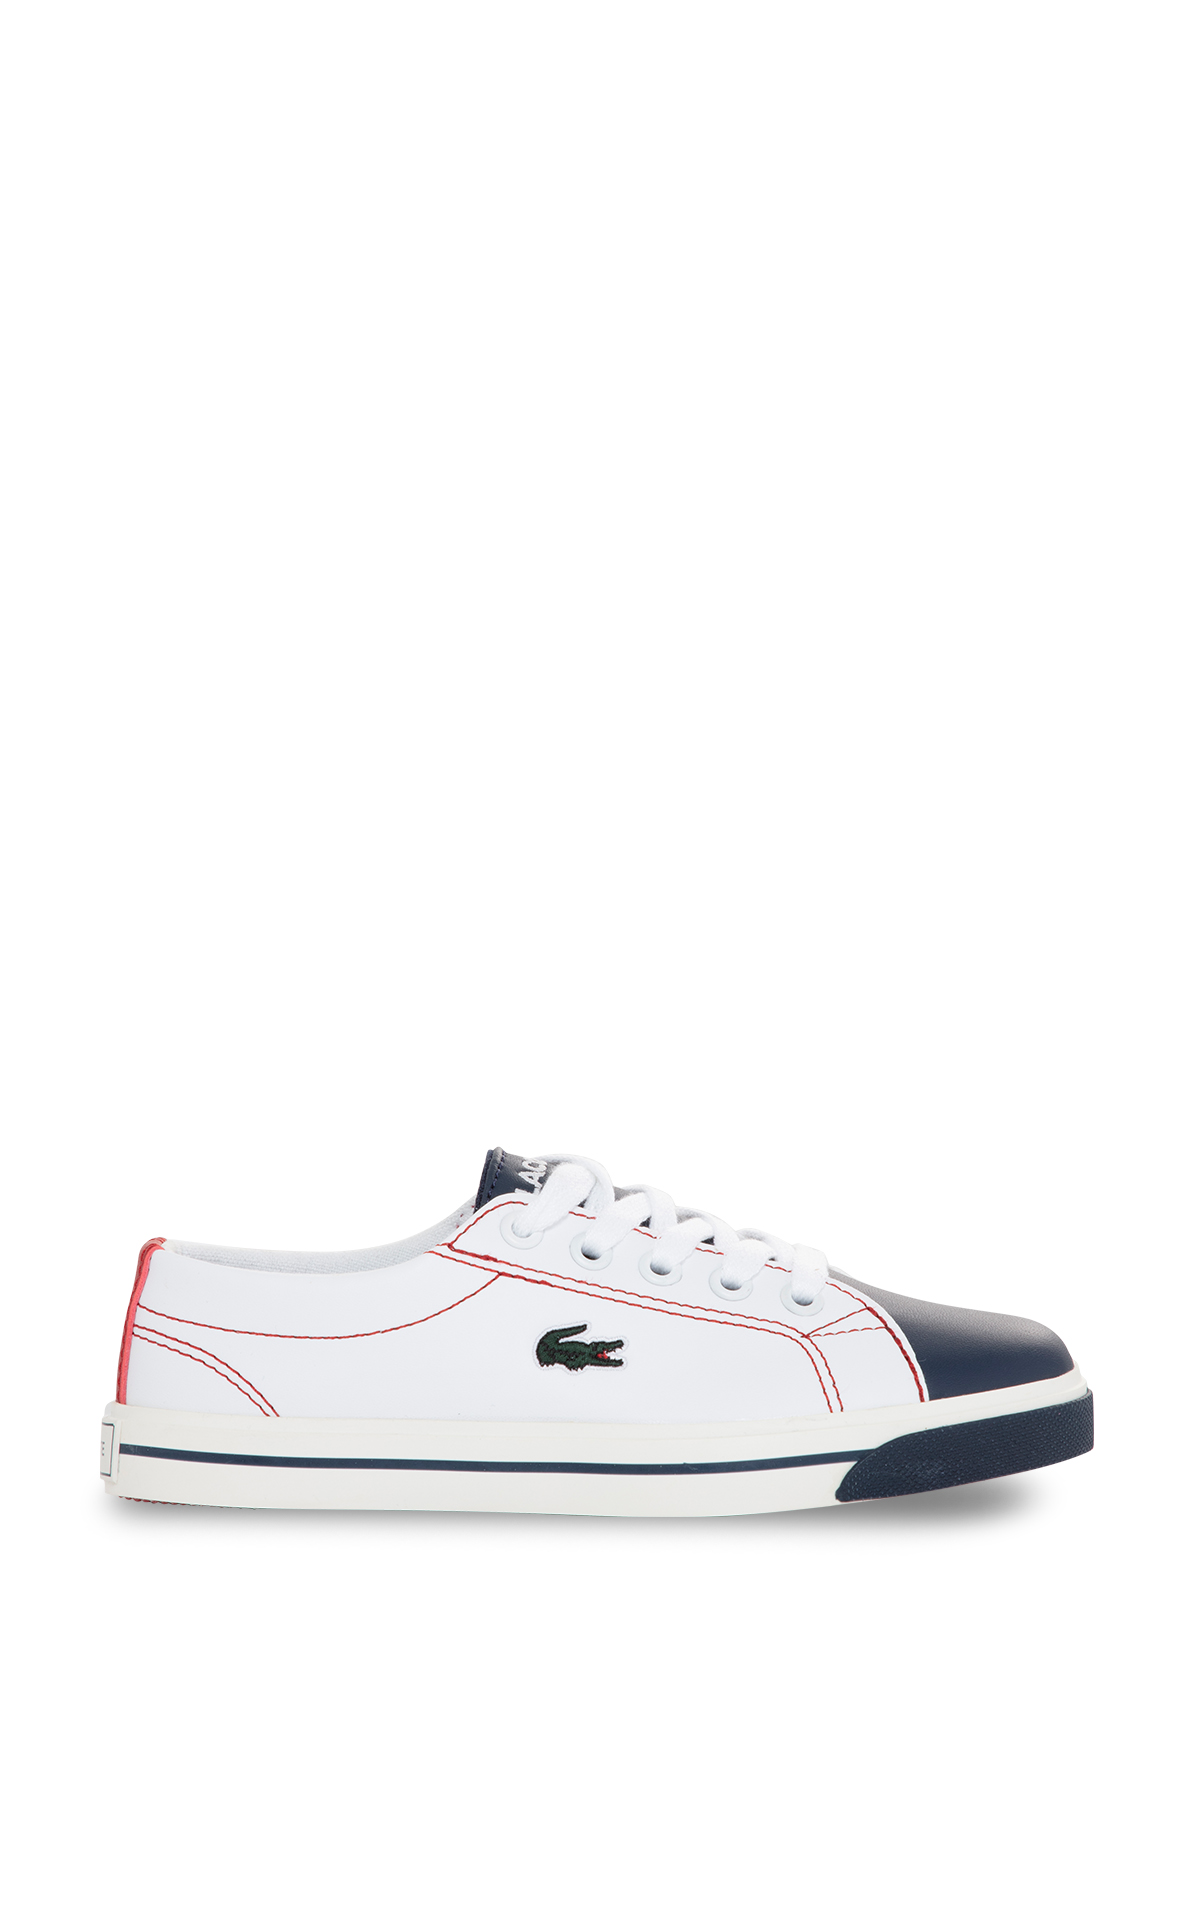 lacoste blue and white shoes